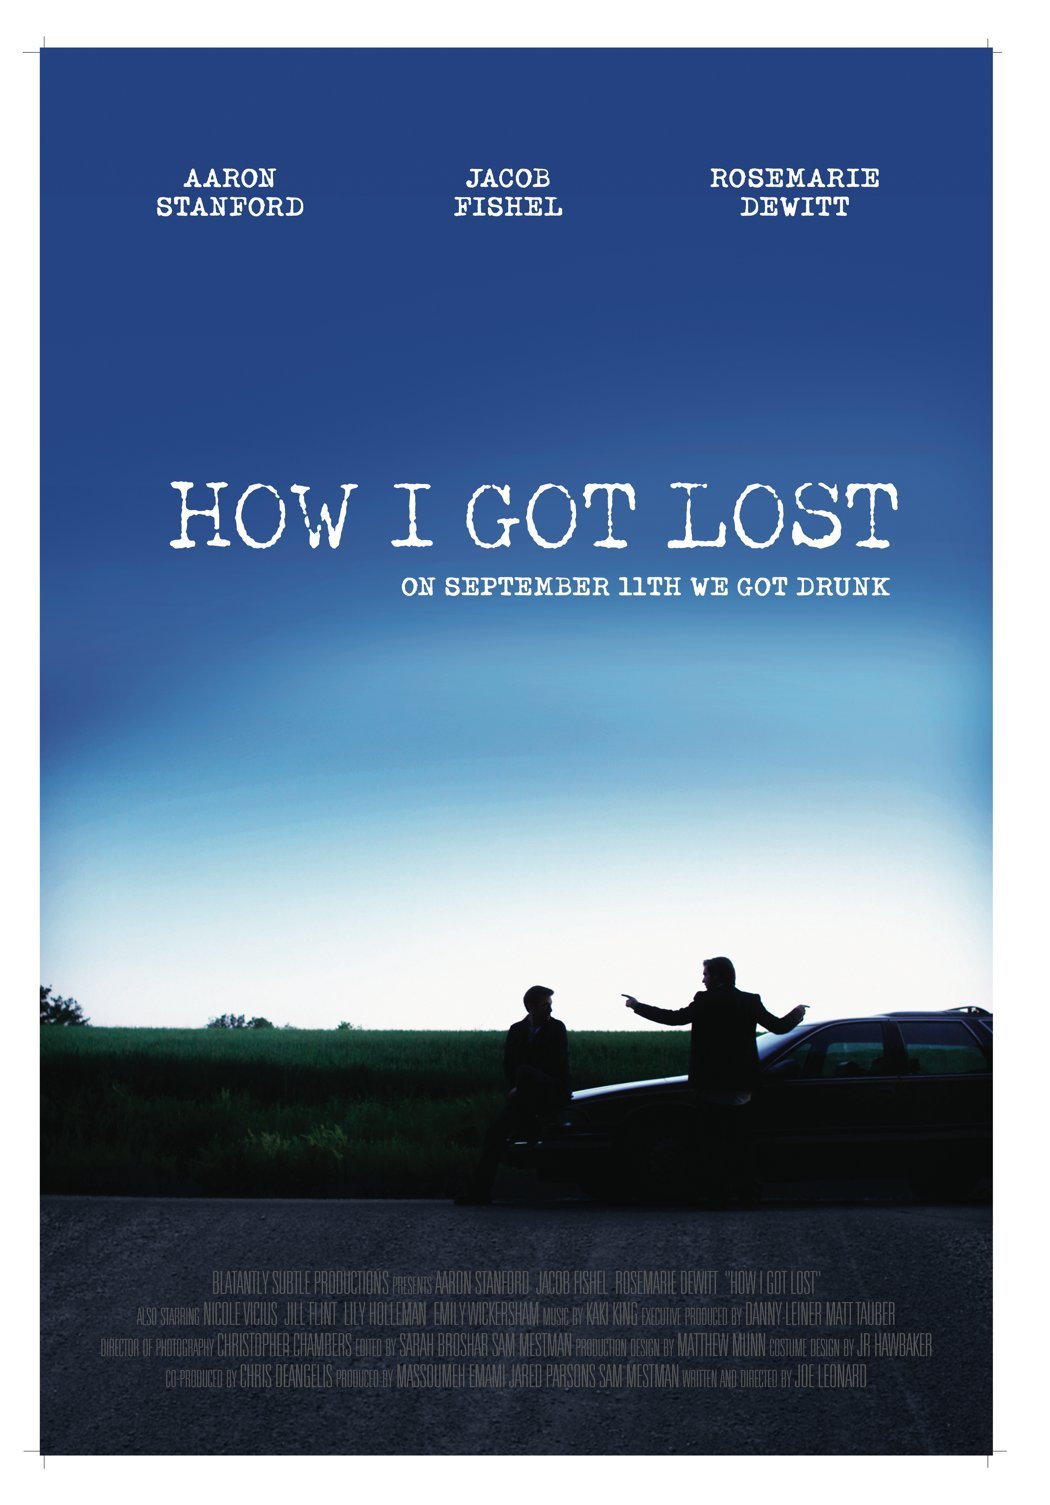 How I Got Lost (2009) starring Aaron Stanford on DVD on DVD